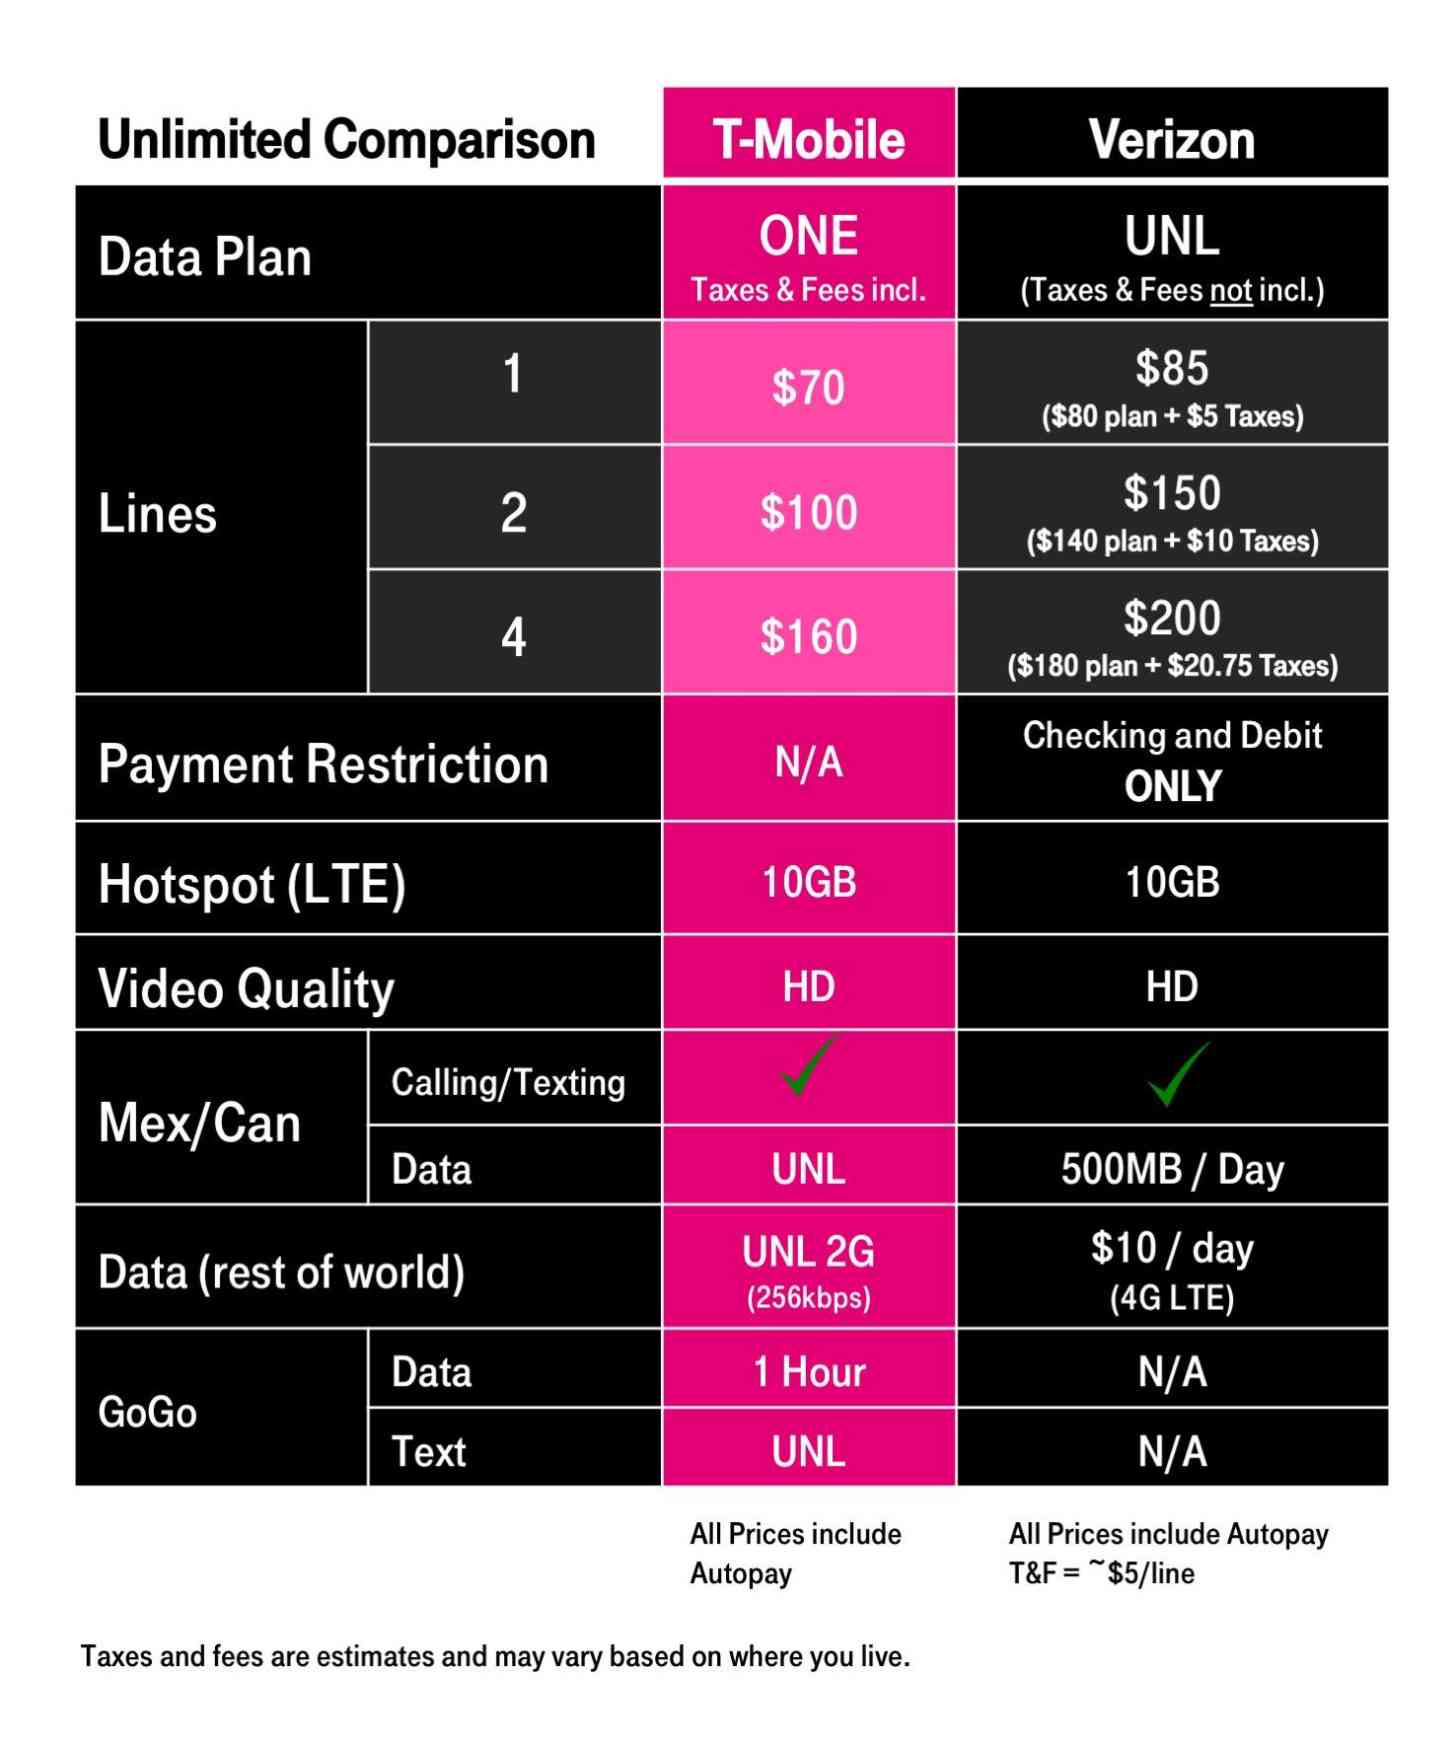 Verizon vs. T-Mobile 'unlimited', which one is better? | PhoneDog